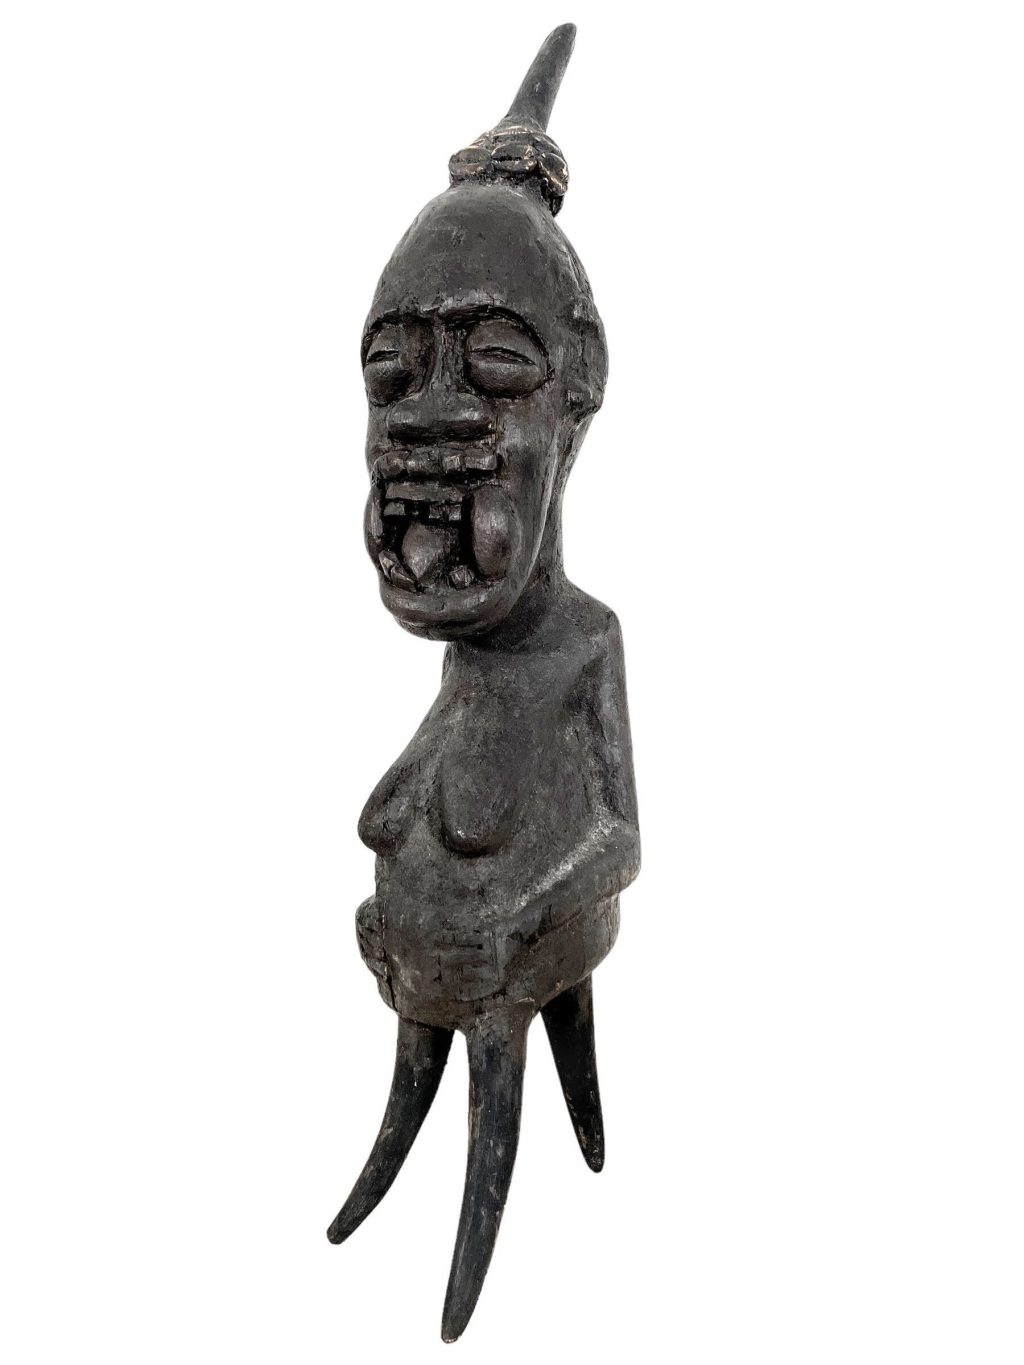 Vintage African Songye Goolled Nkisi Power Figurine Wooden Decor Carved Statue Carving Sculpture Wood Tribal Art c1980’s